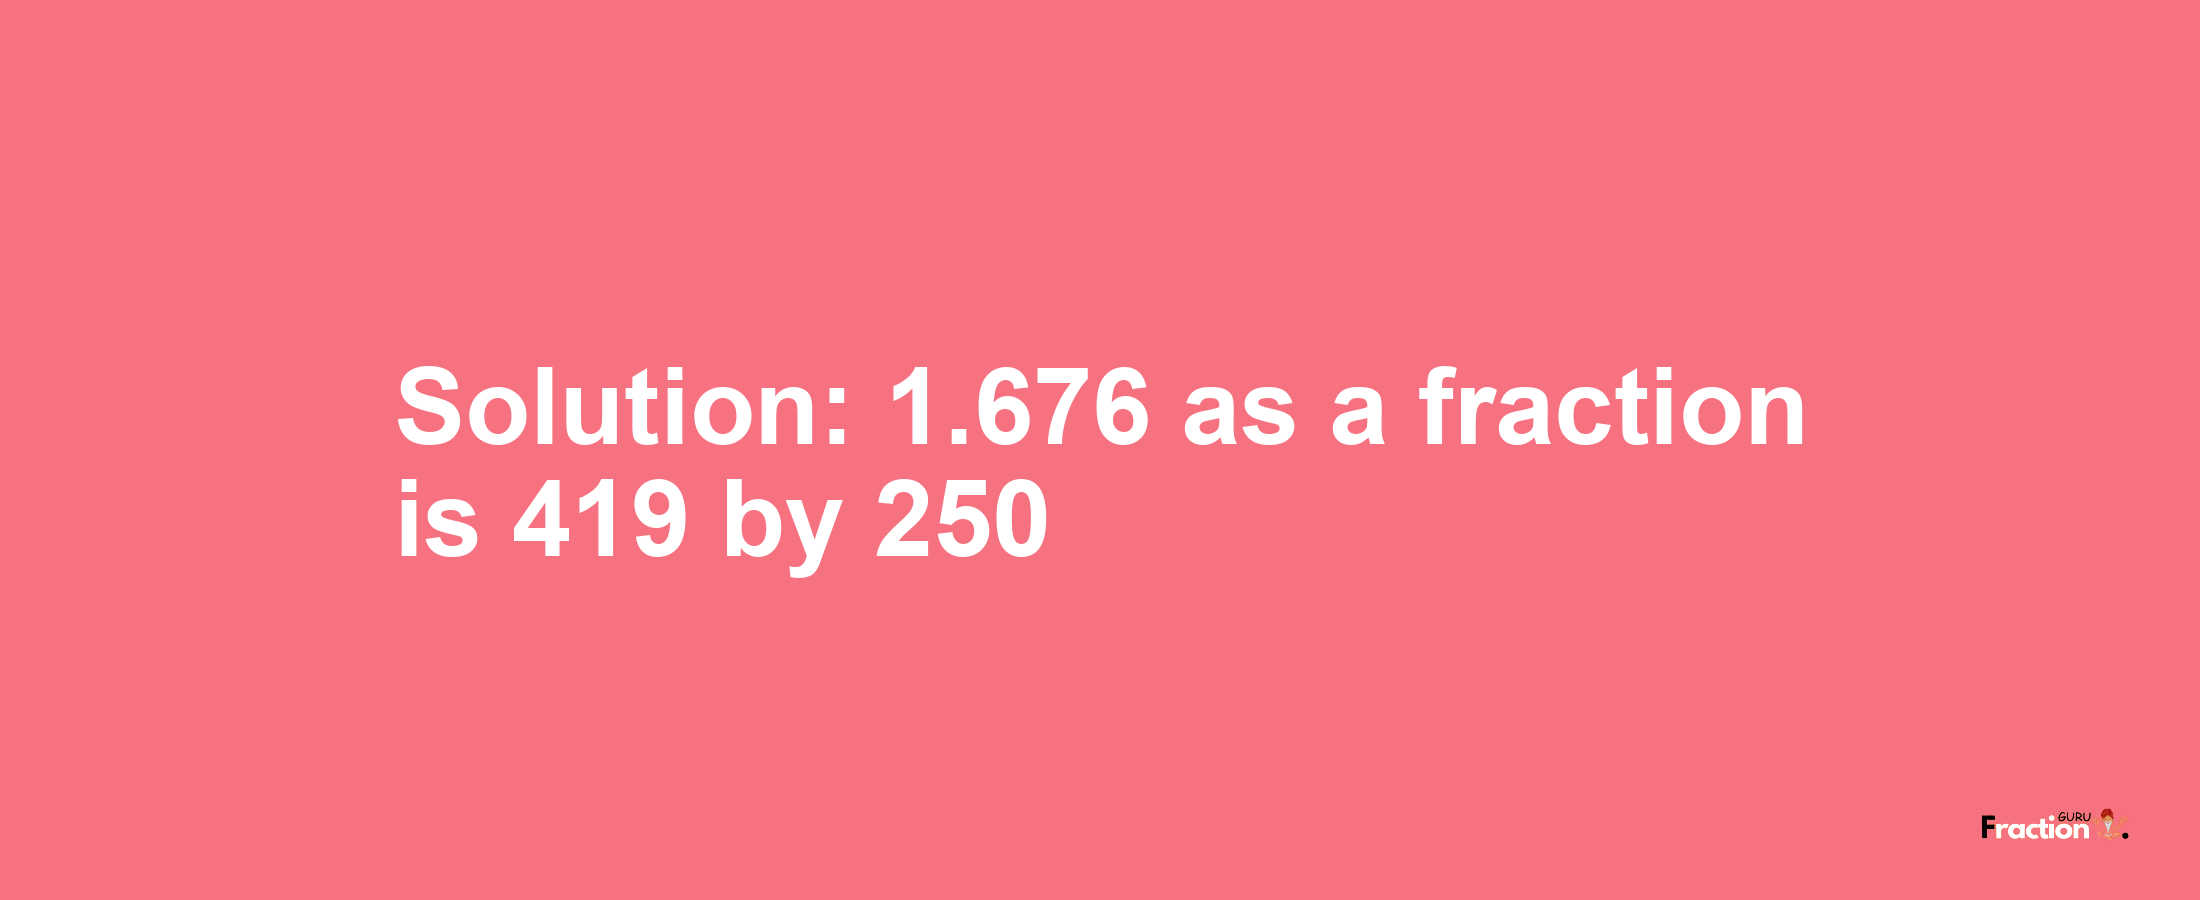 Solution:1.676 as a fraction is 419/250